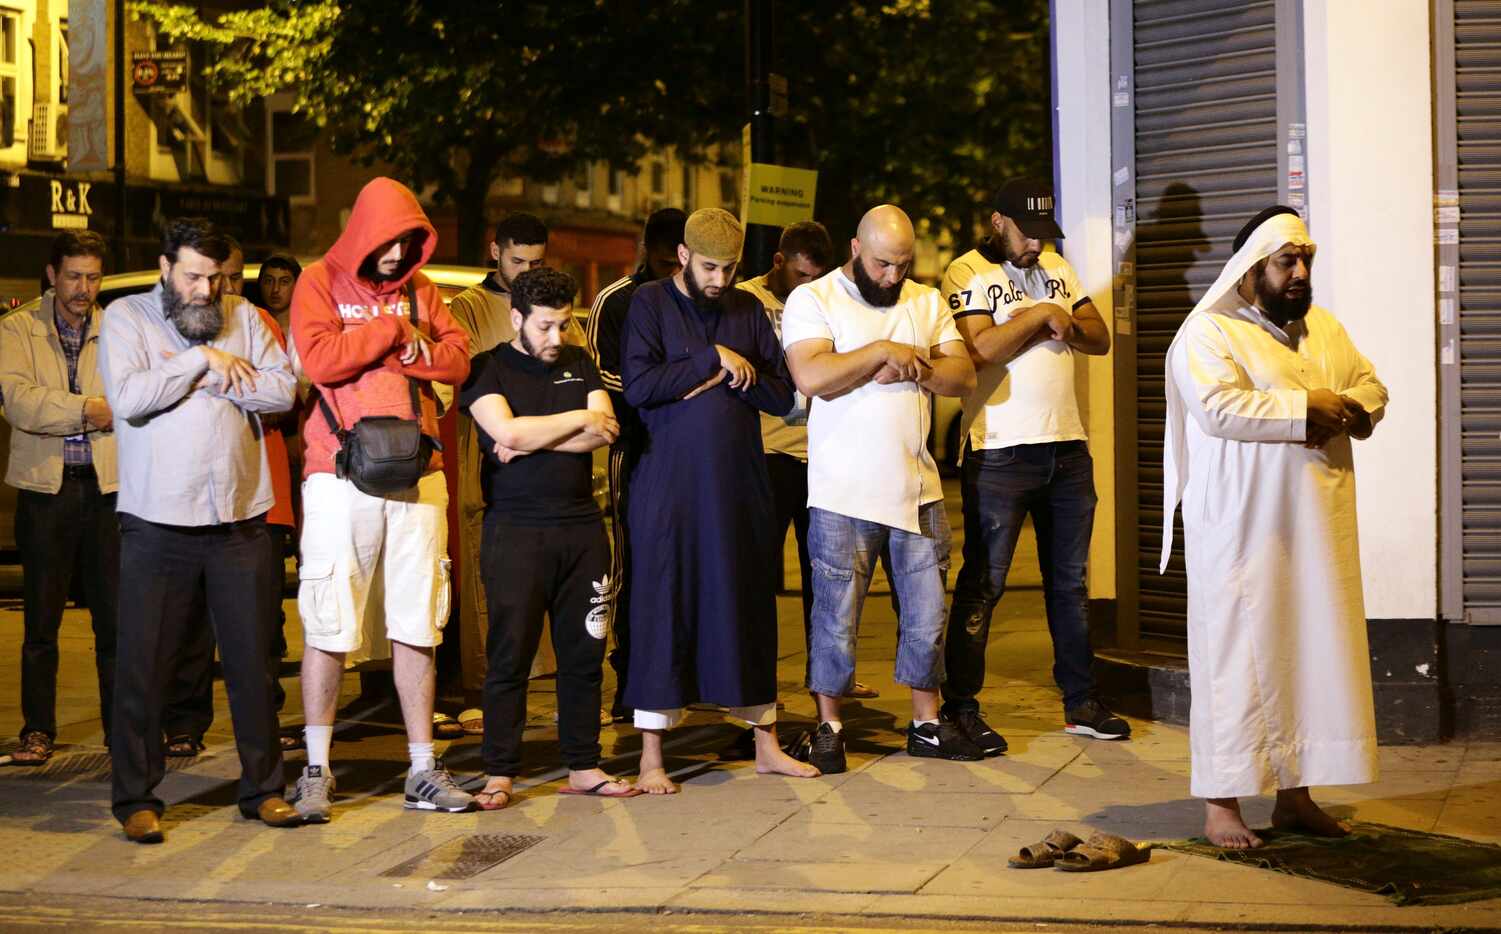 Local people observe prayers at Finsbury Park where a vehicle struck pedestrians in London...